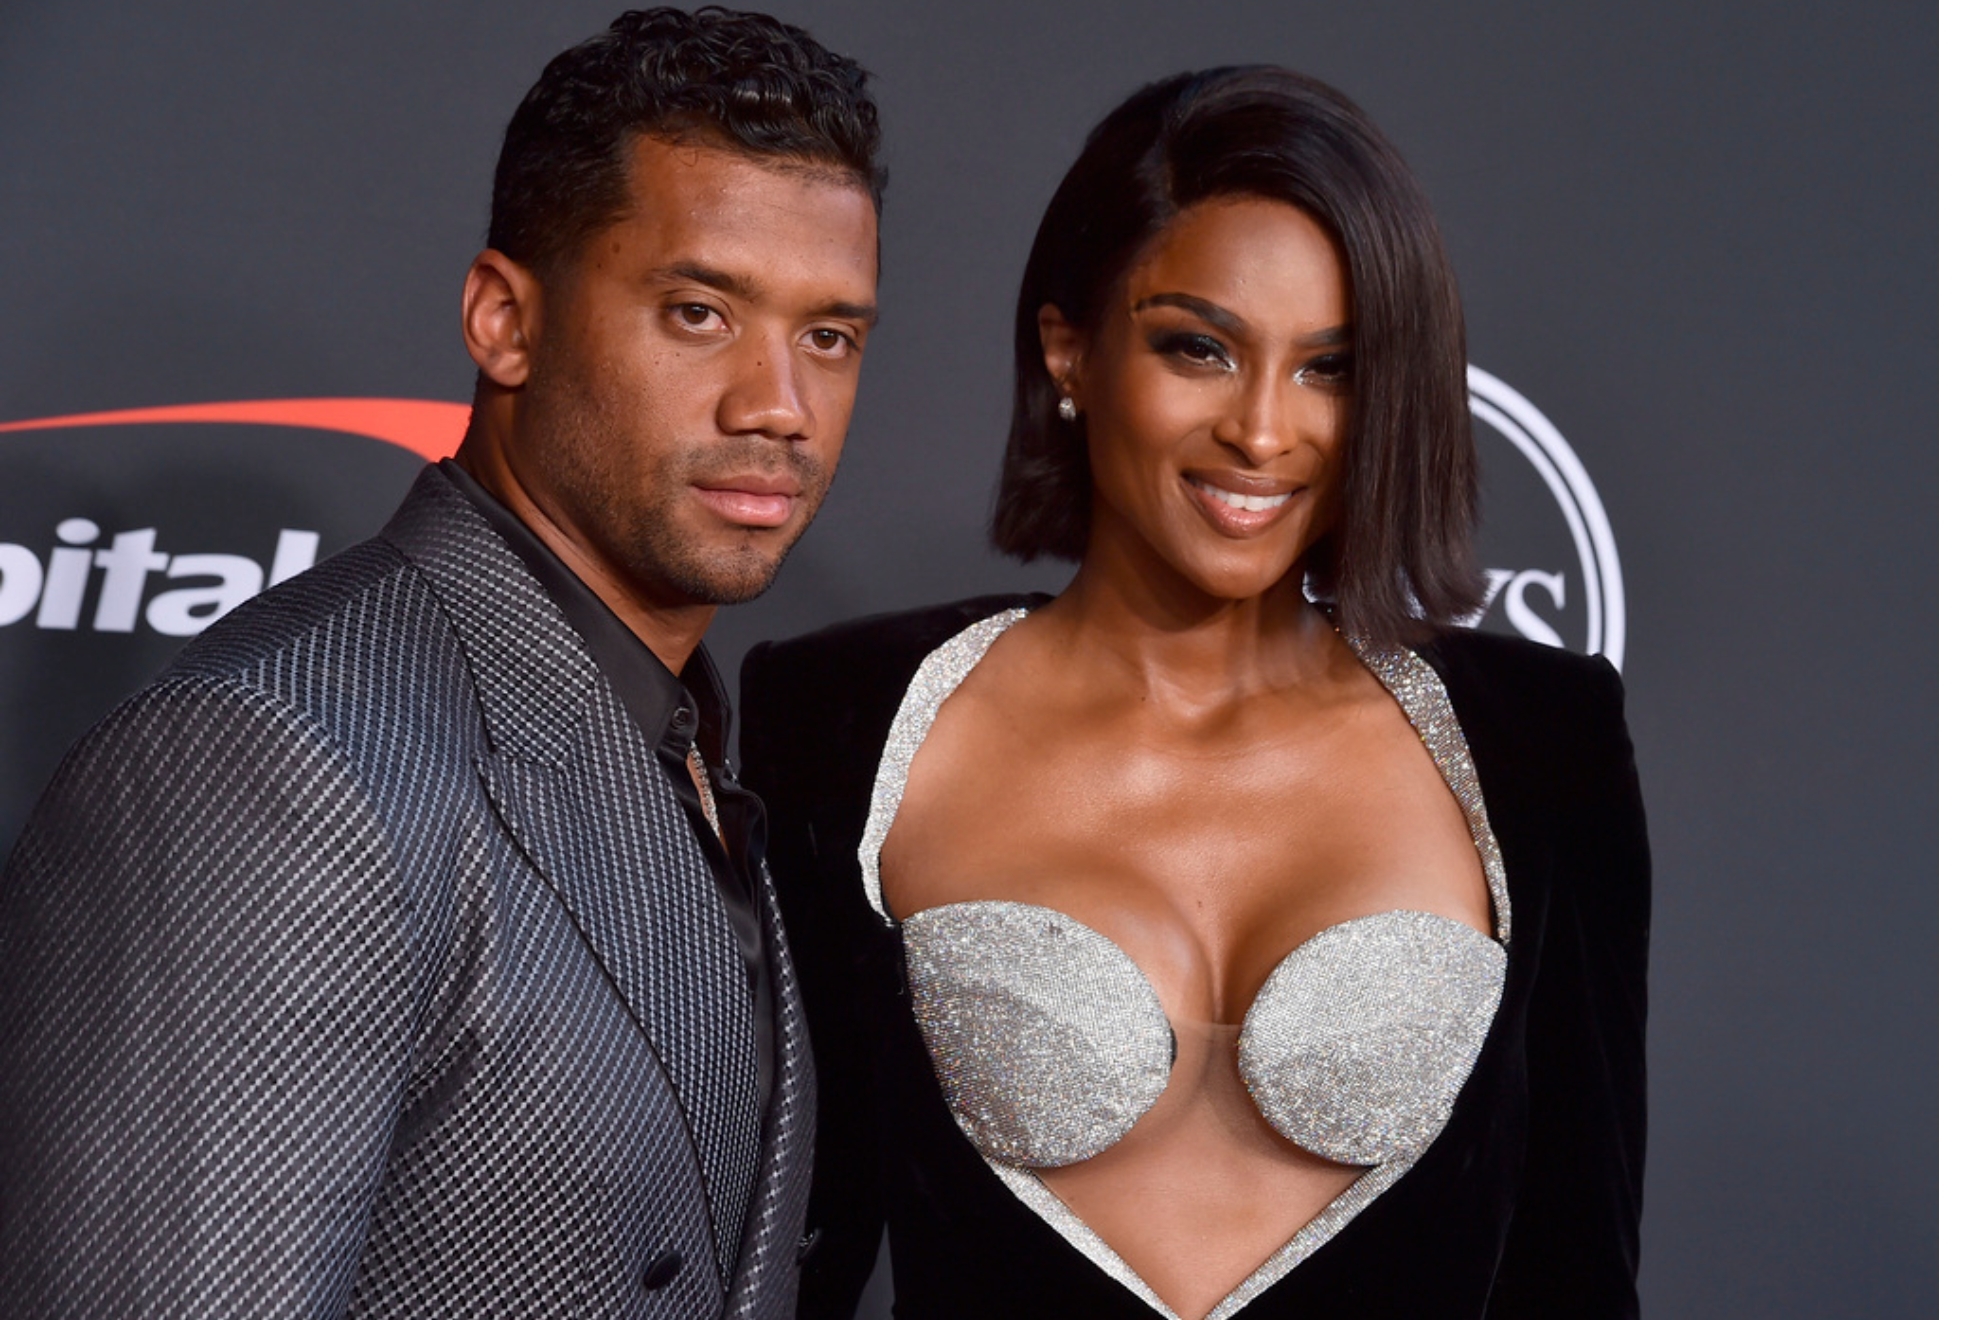 Ciara and Russell Wilson recently welcomed their new baby